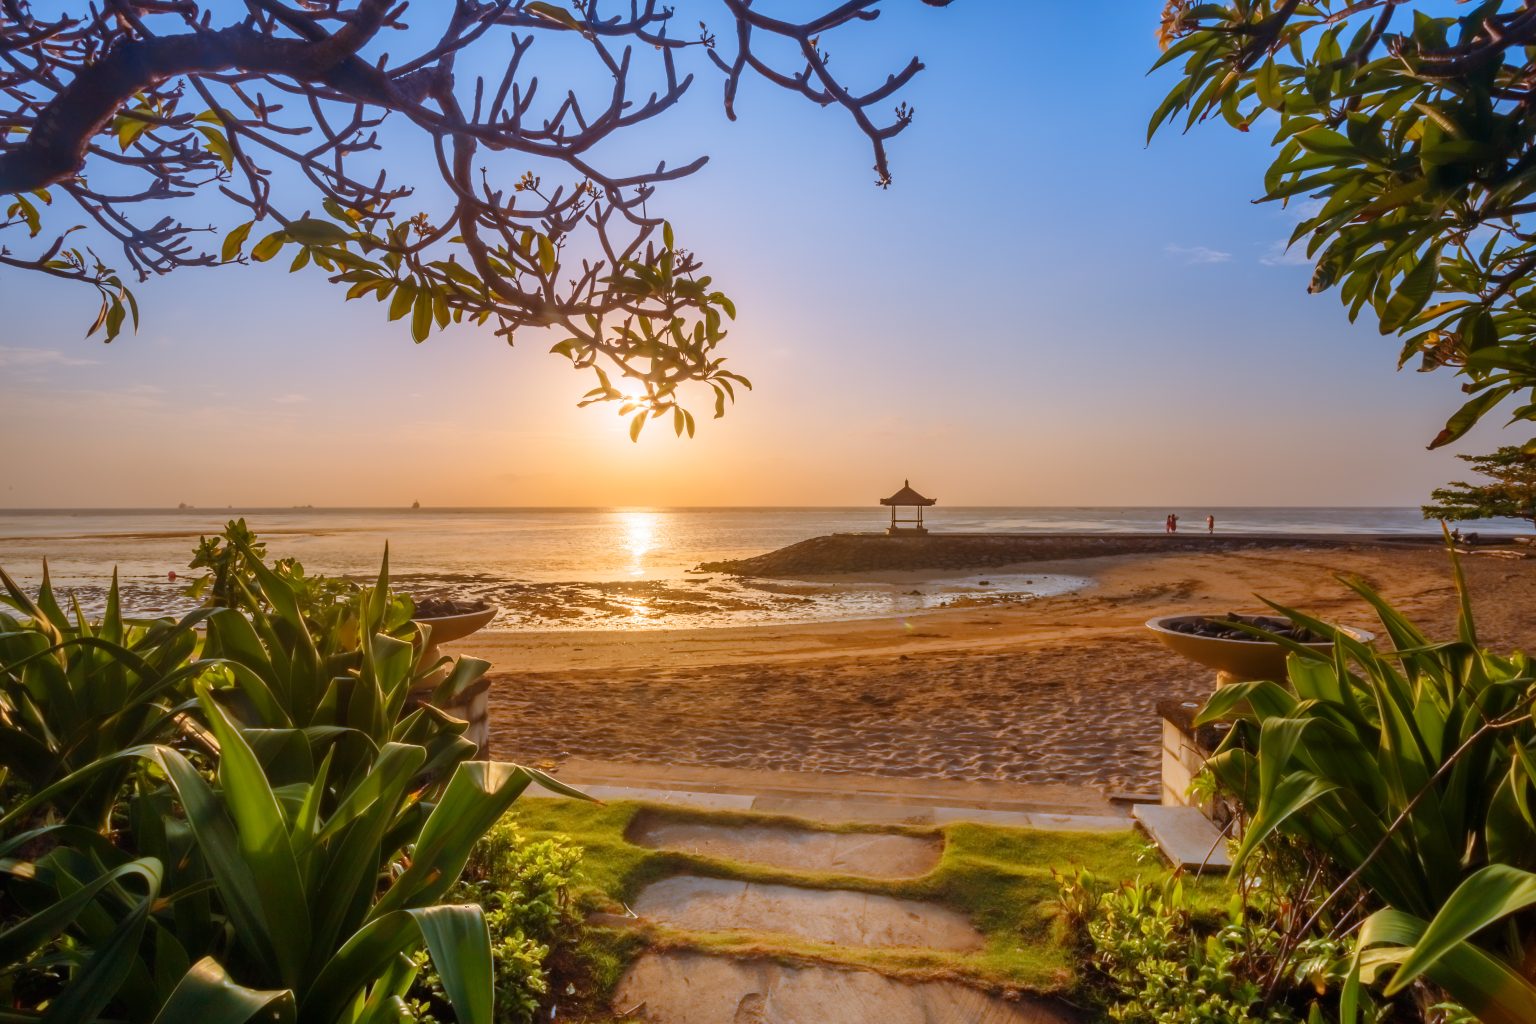  A view of the beach in Denpasar, Bali, Indonesia, with a sunset over the ocean.